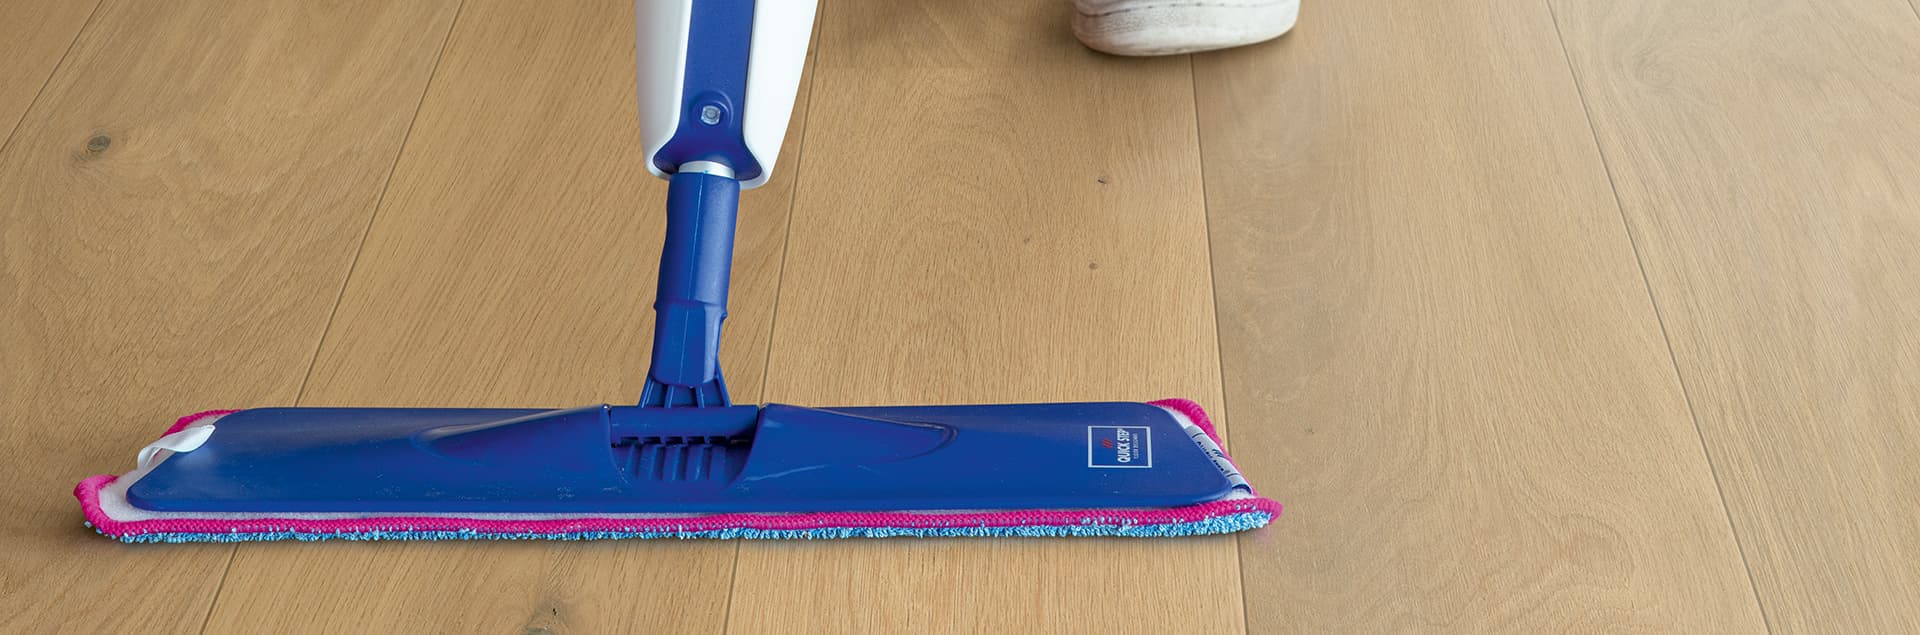 Quick-step cleaning and repair for wood